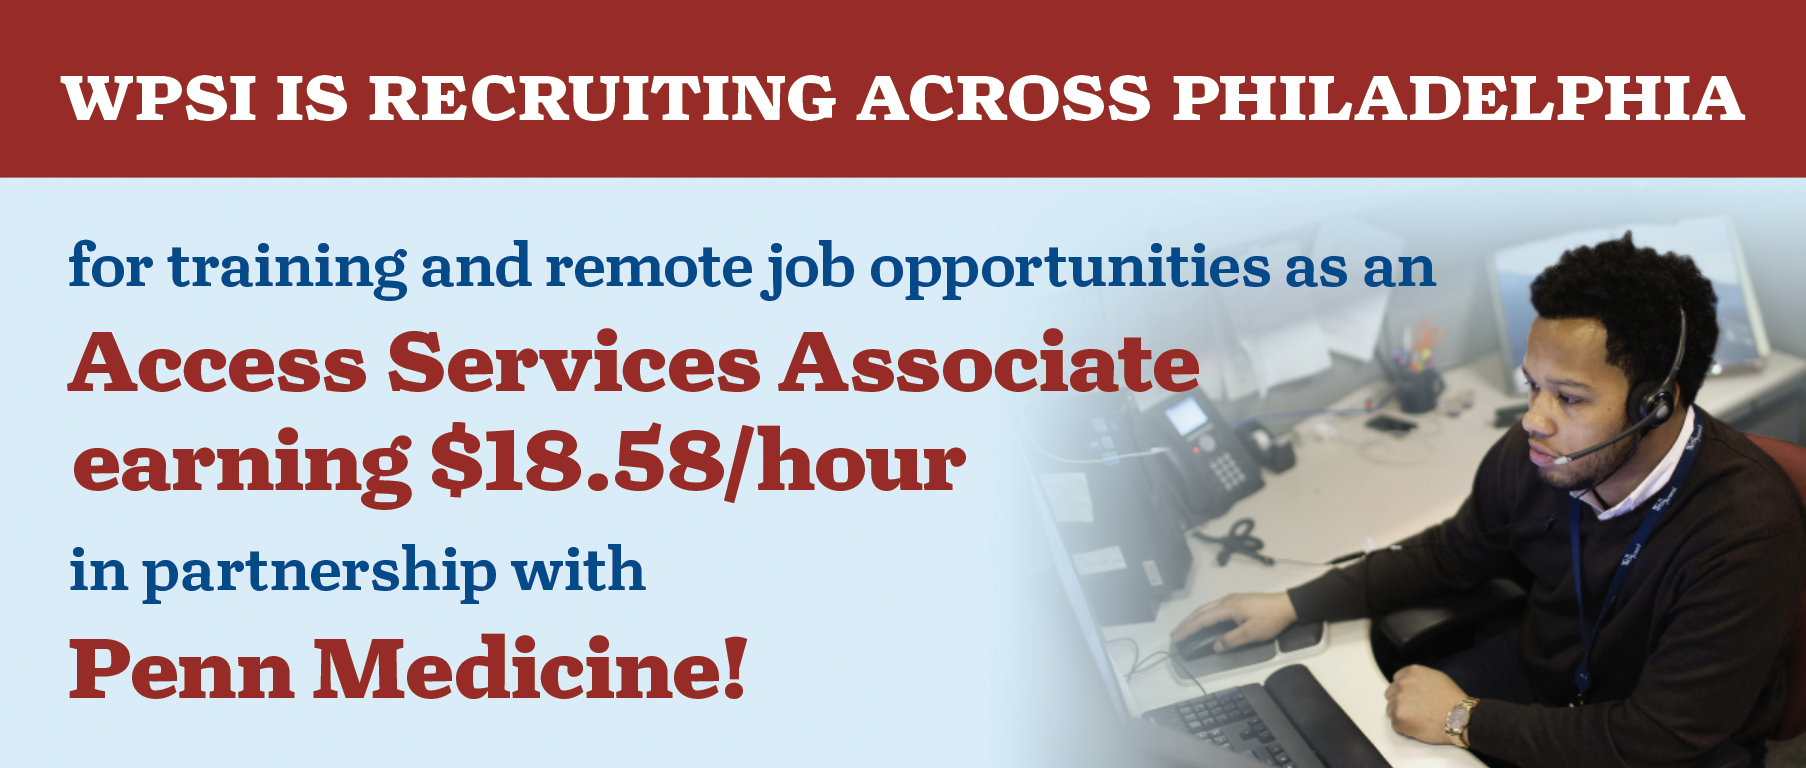 WPSI is now recruiting for training and remote job opportunities as an Access Services Associate earning $18.58/hour in partnership with Penn Medicine!